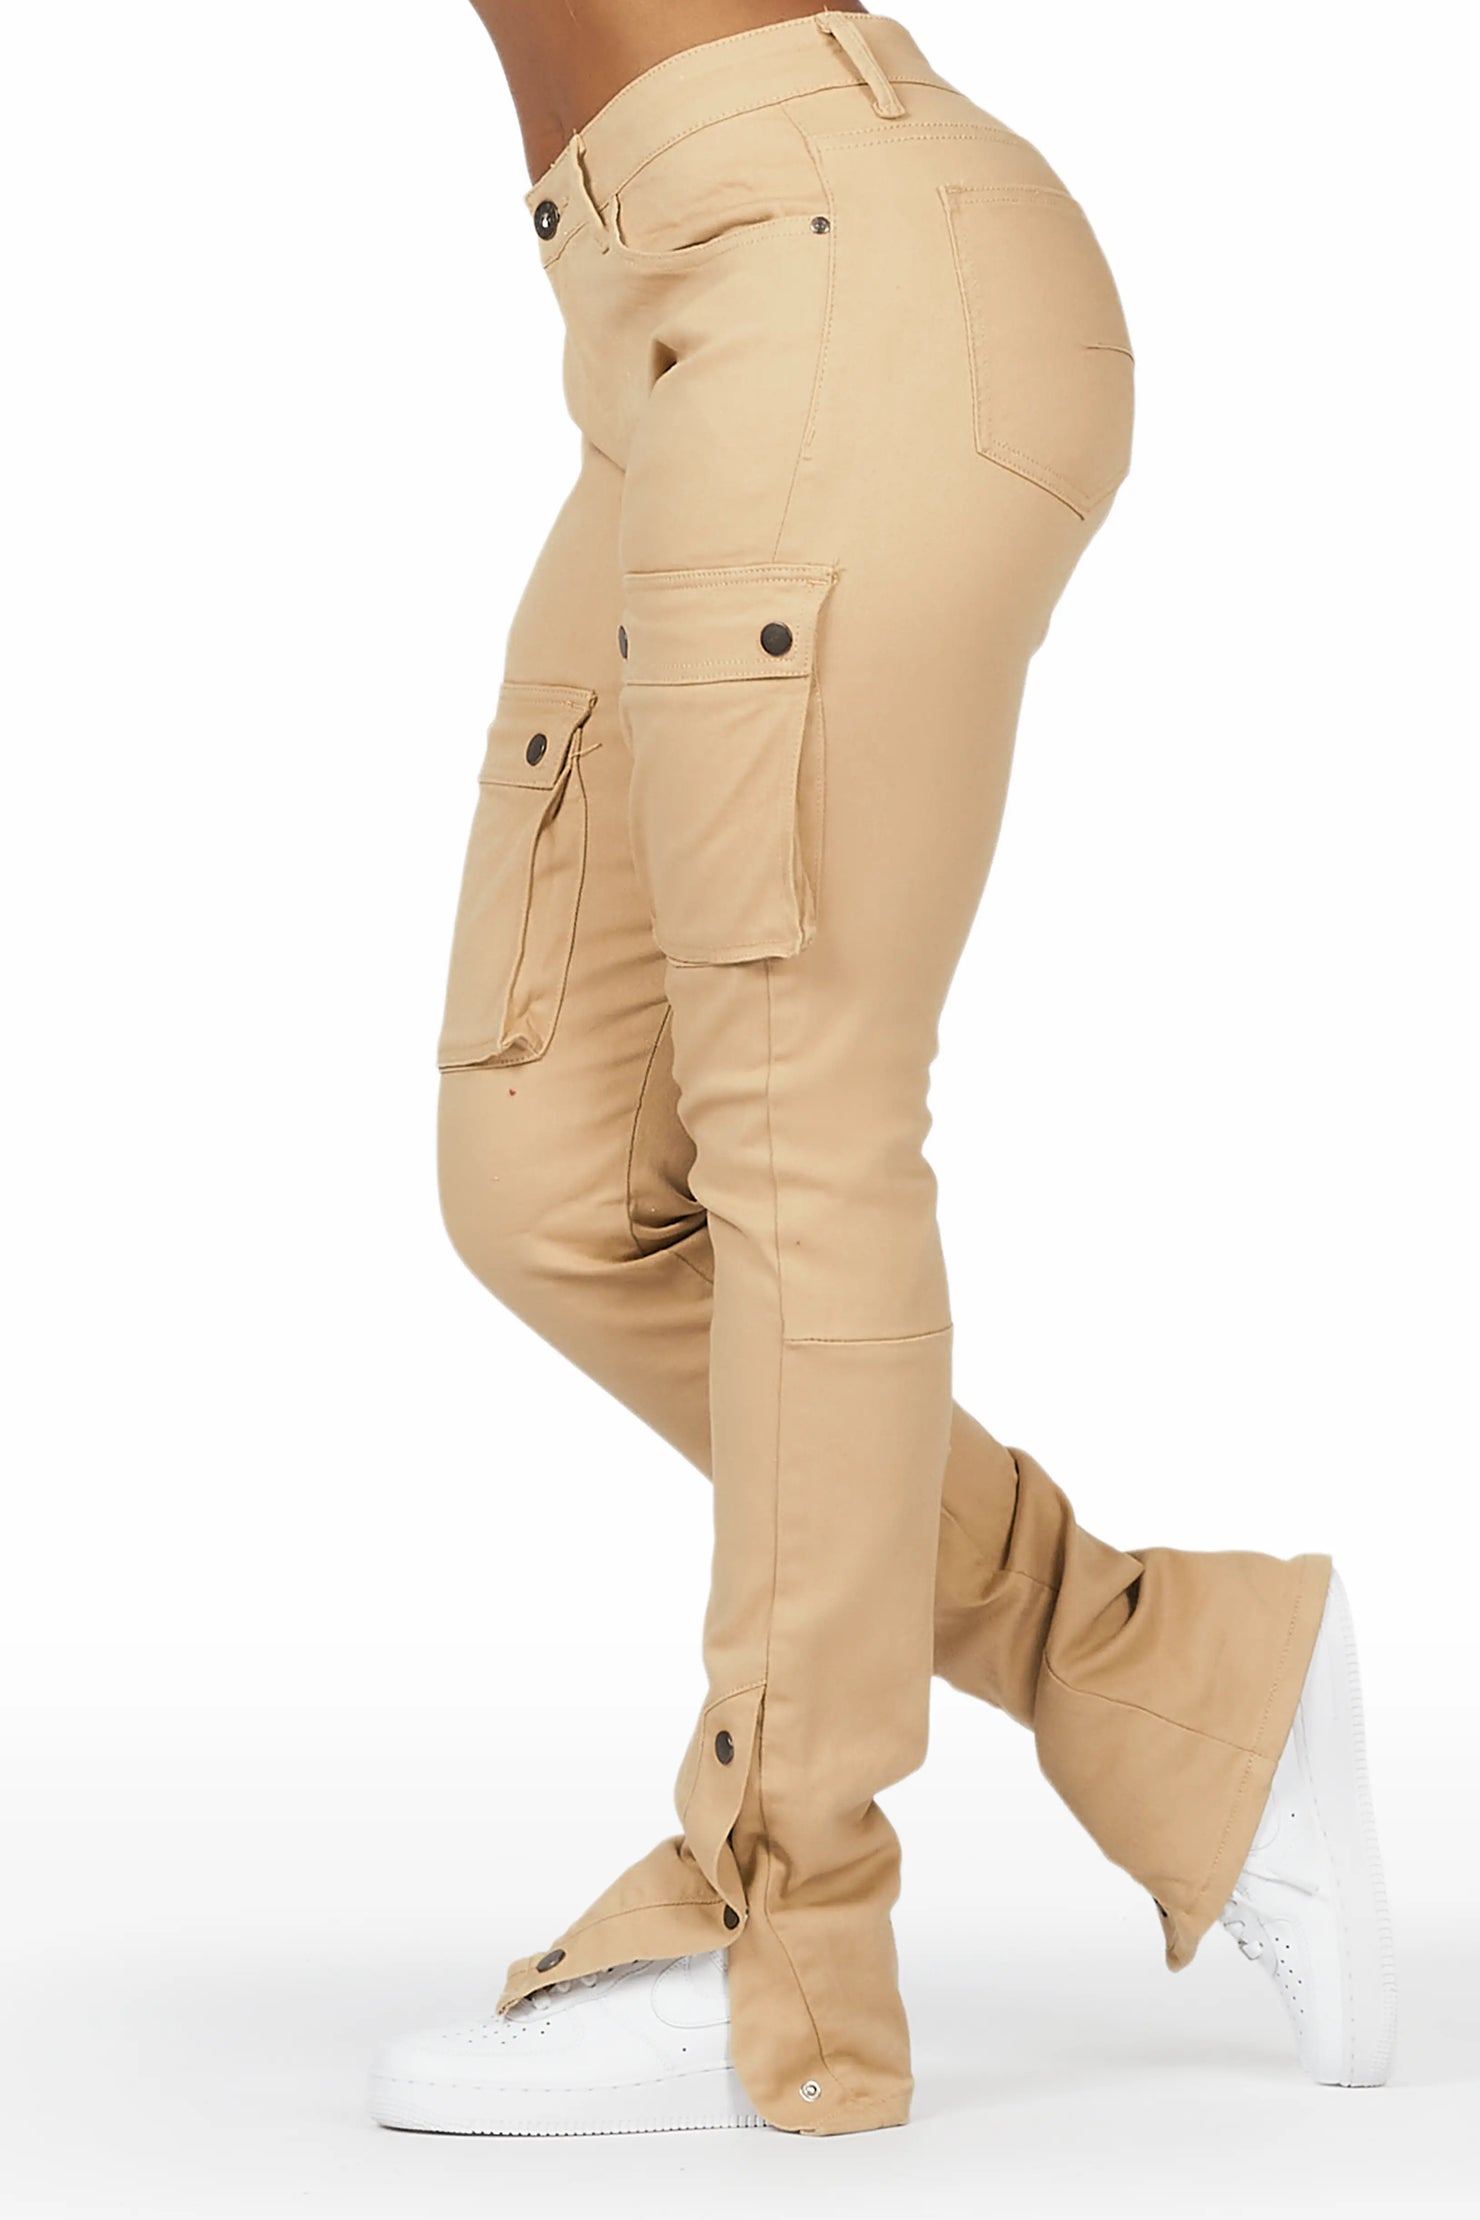 Kathryn Tan Stacked Flare Jean